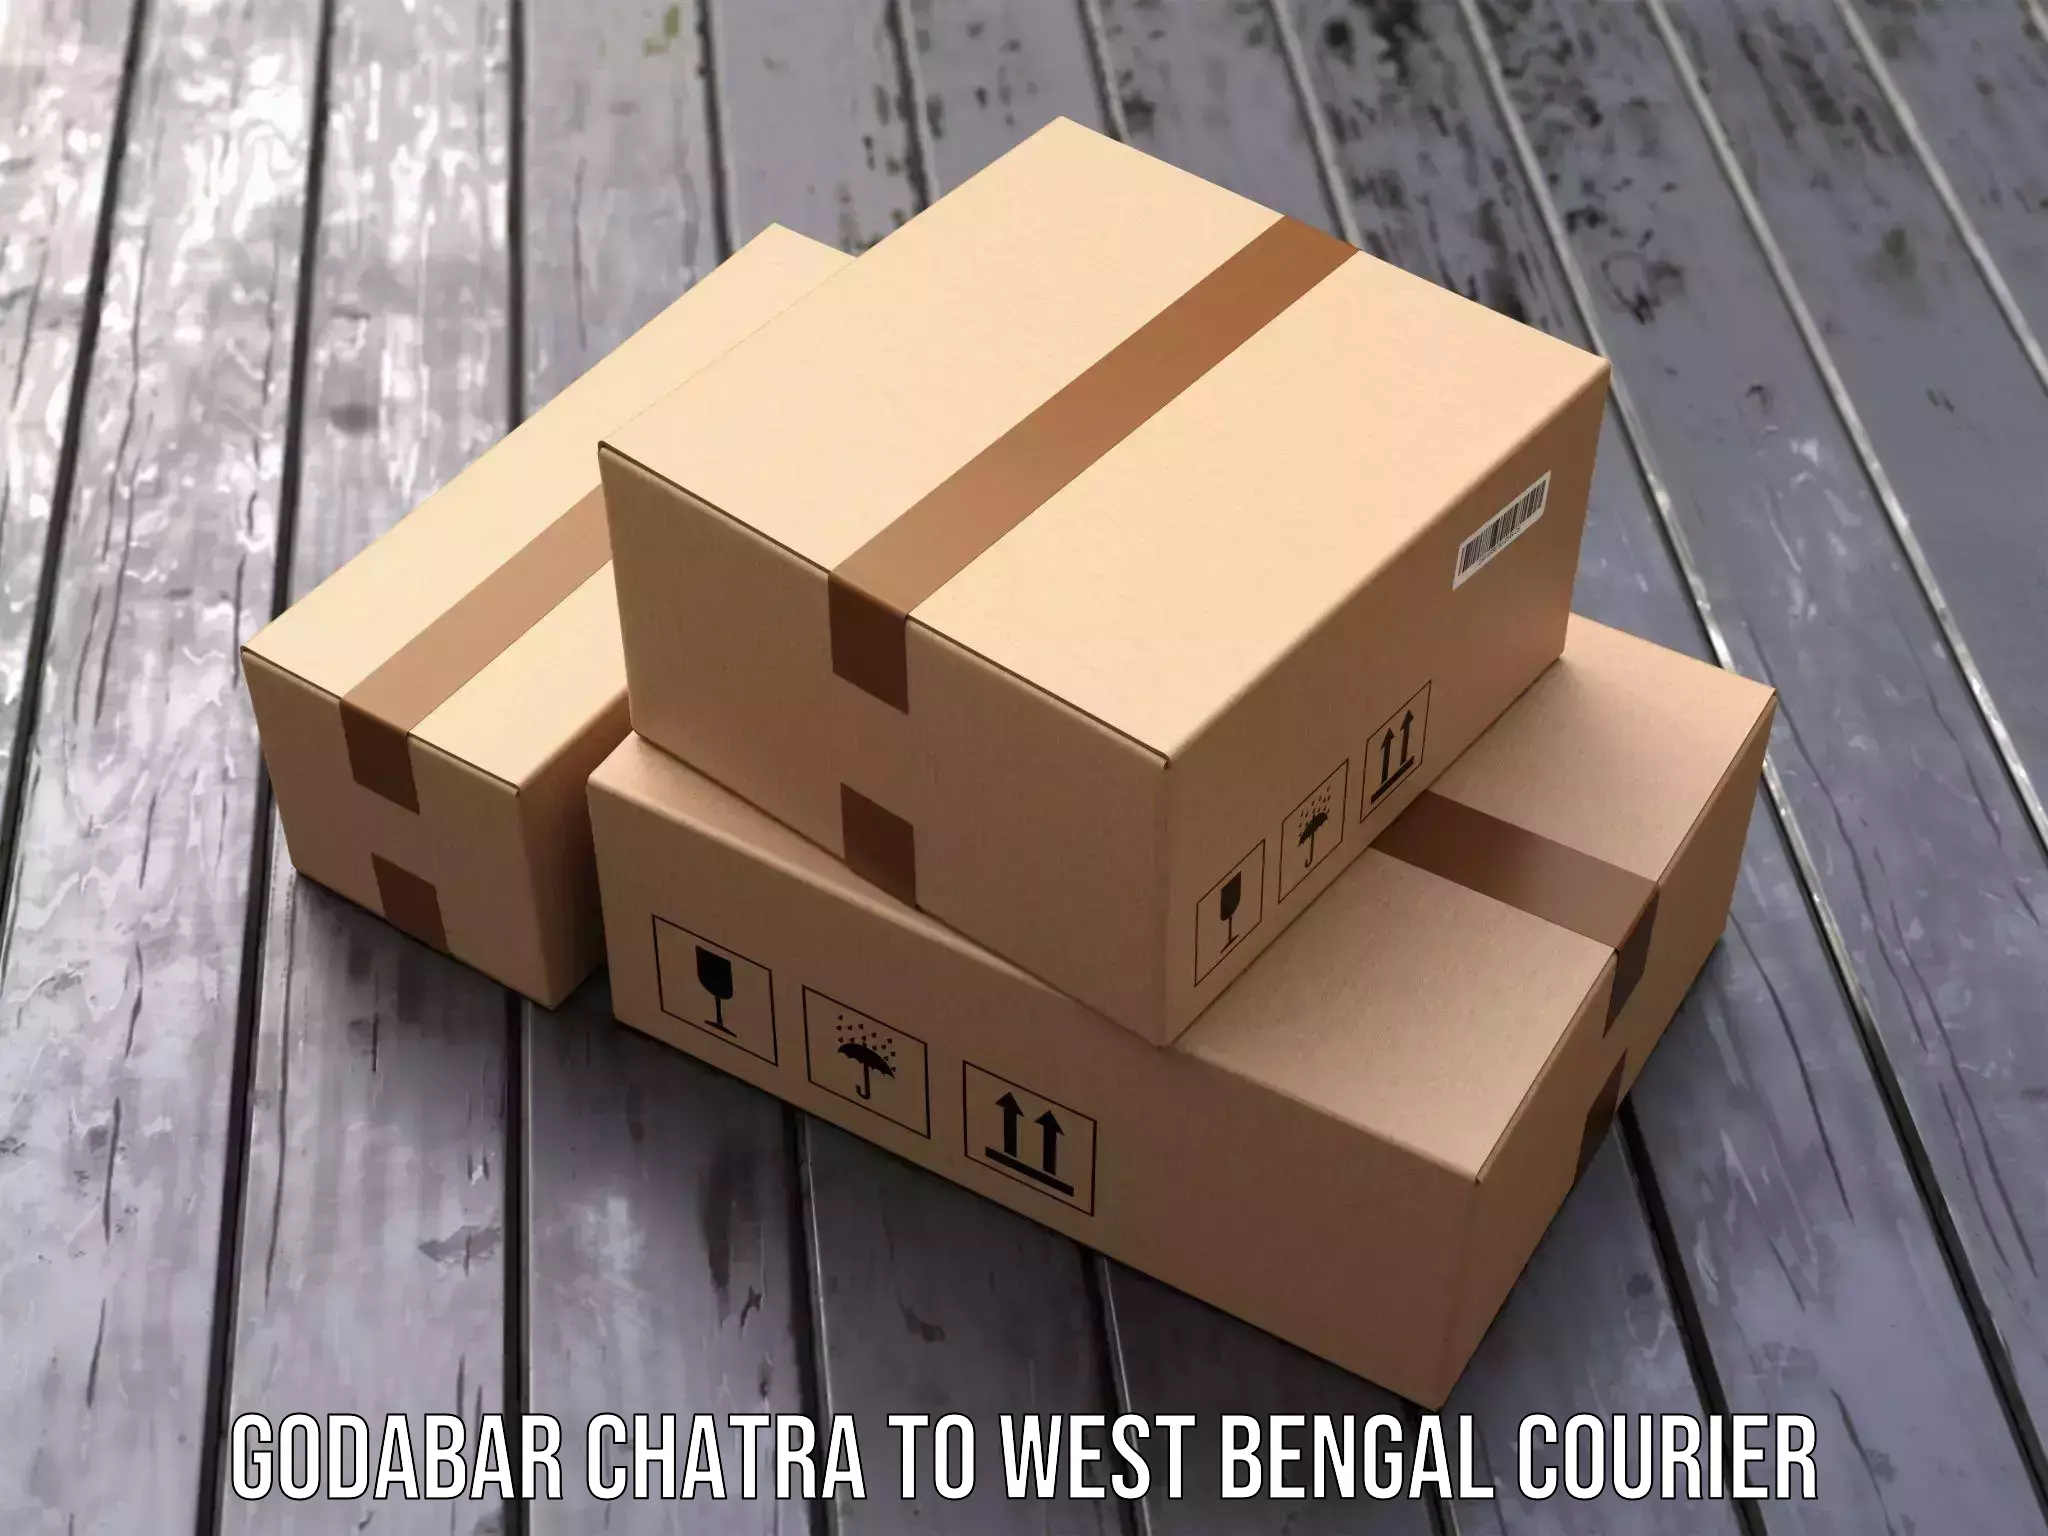 Professional parcel services Godabar Chatra to Howrah